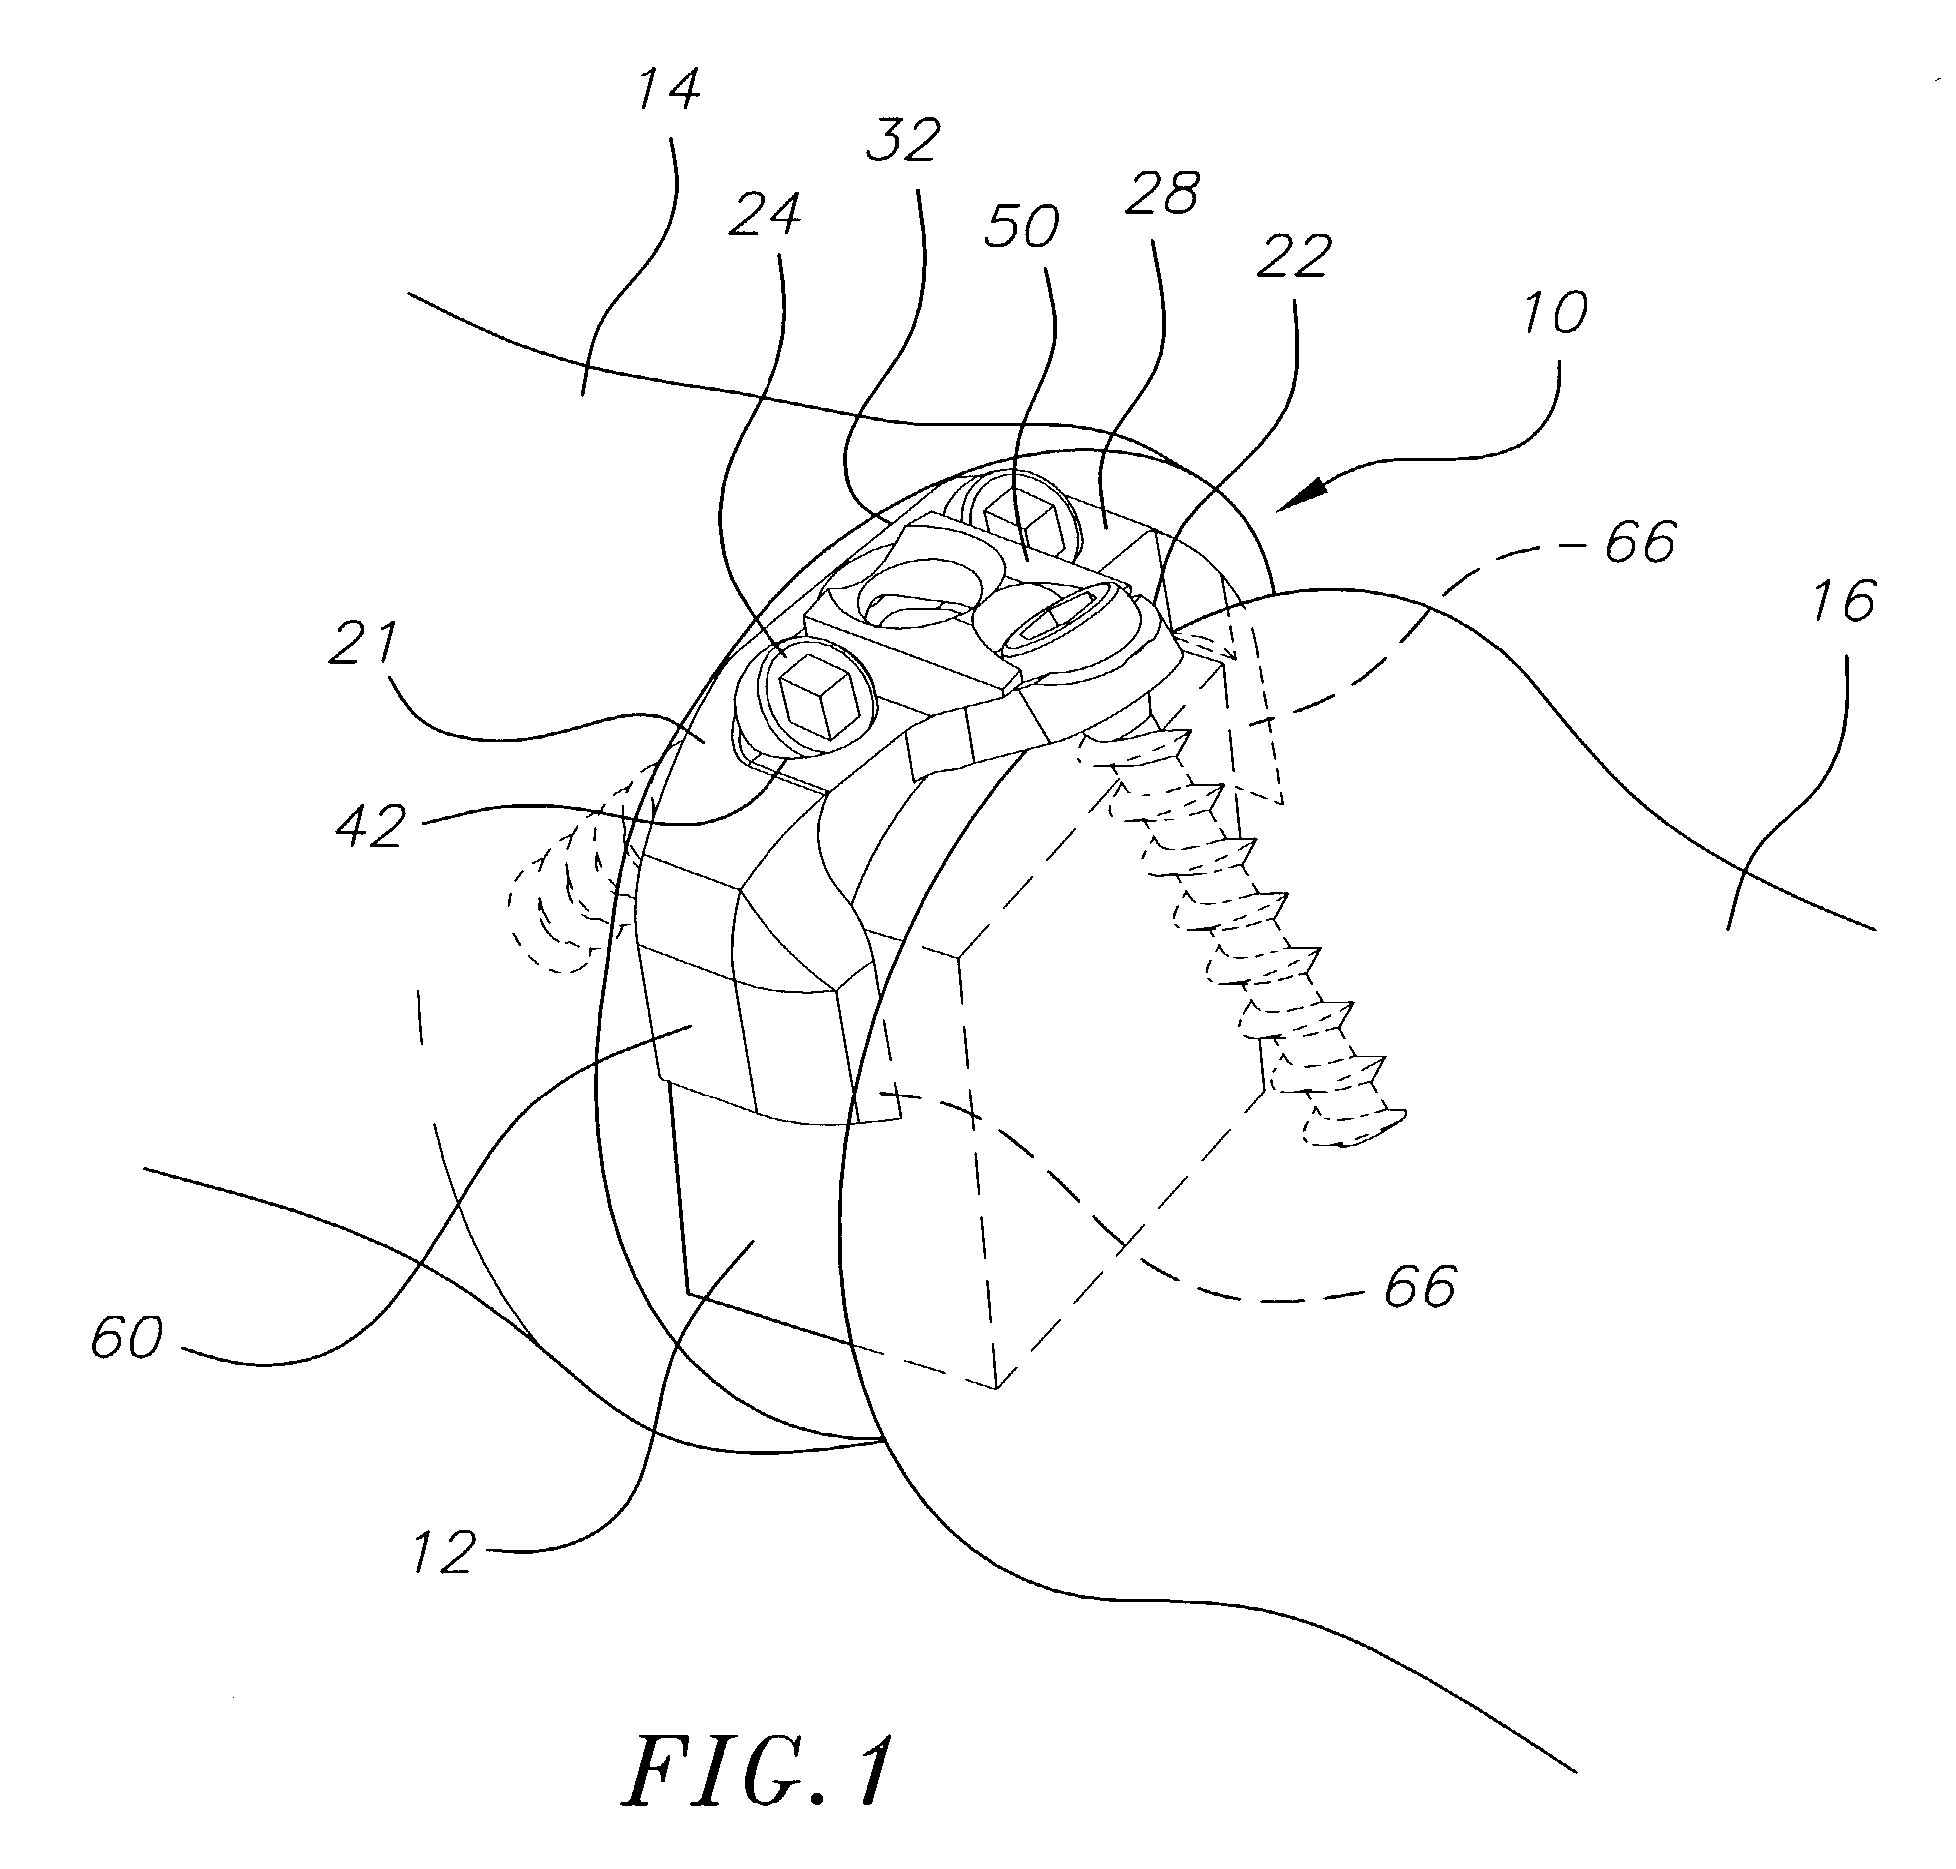 Bone plate stabilization system and method for its use